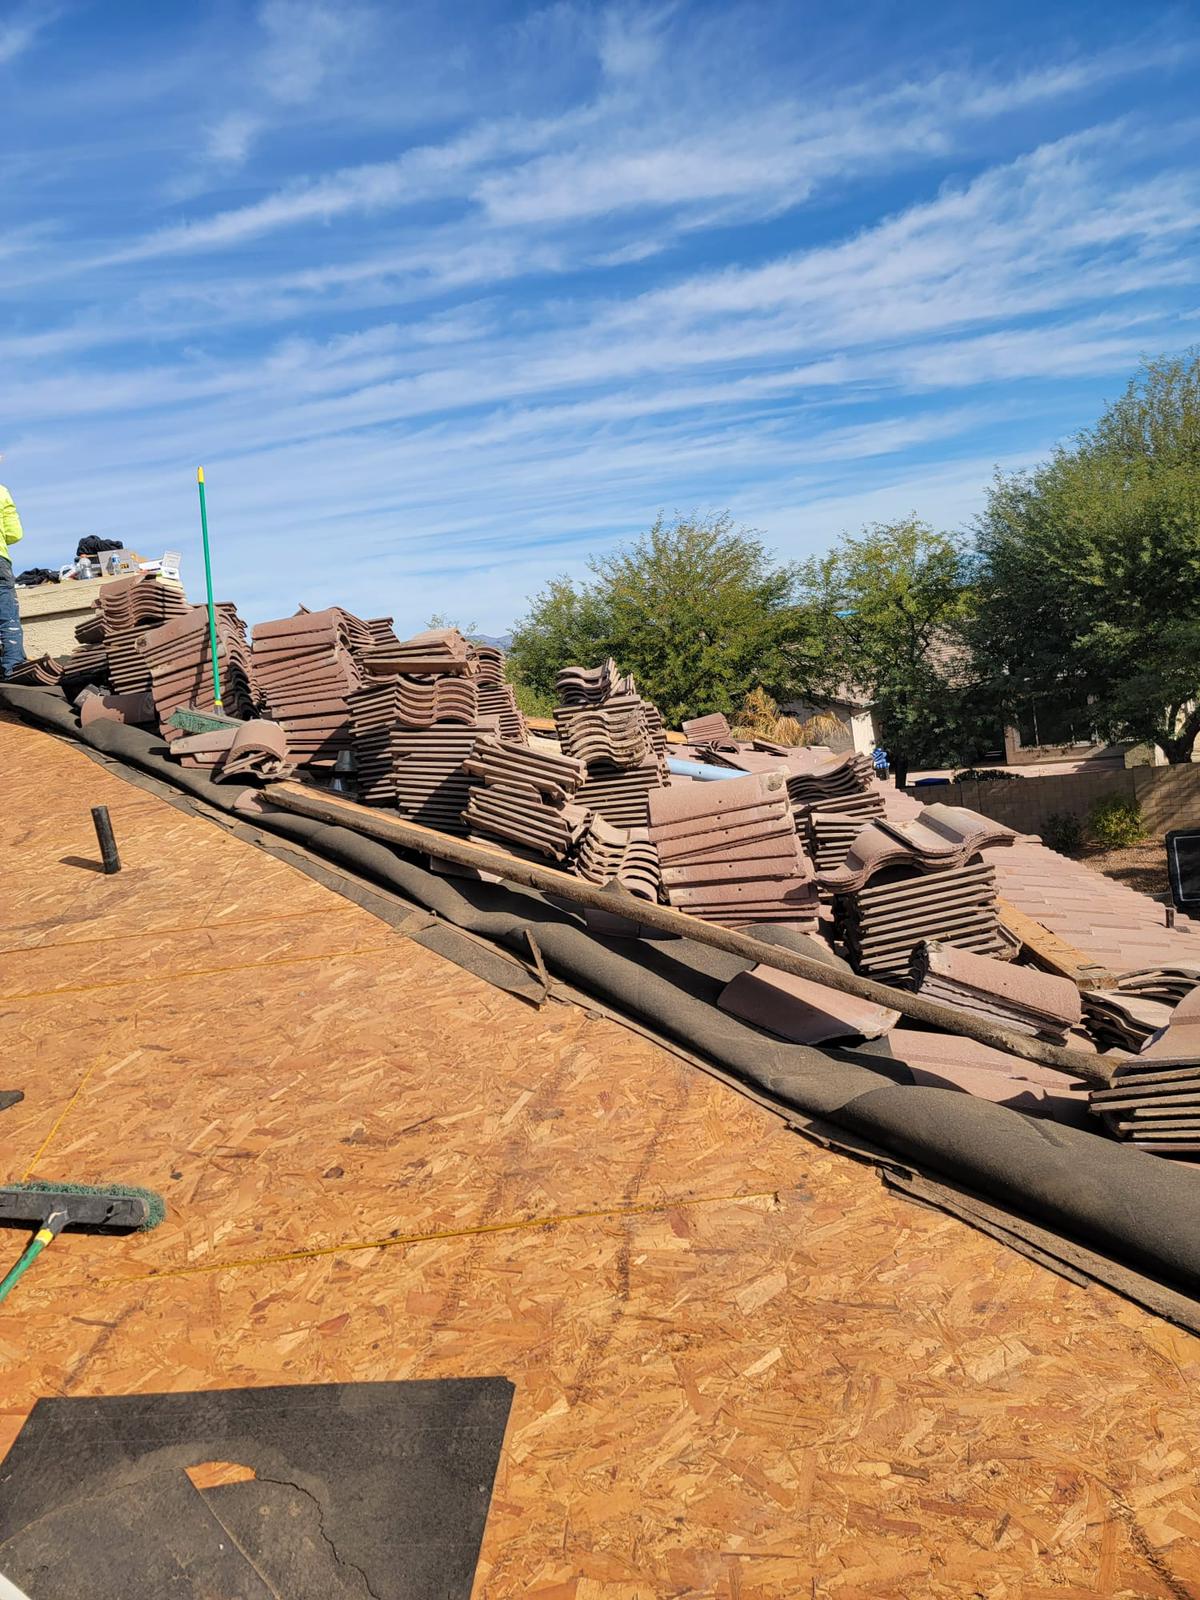 Behmer Roofing stacks roofing tiles with care as part of a tile re-felt project, set against the clear skies of Tempe.